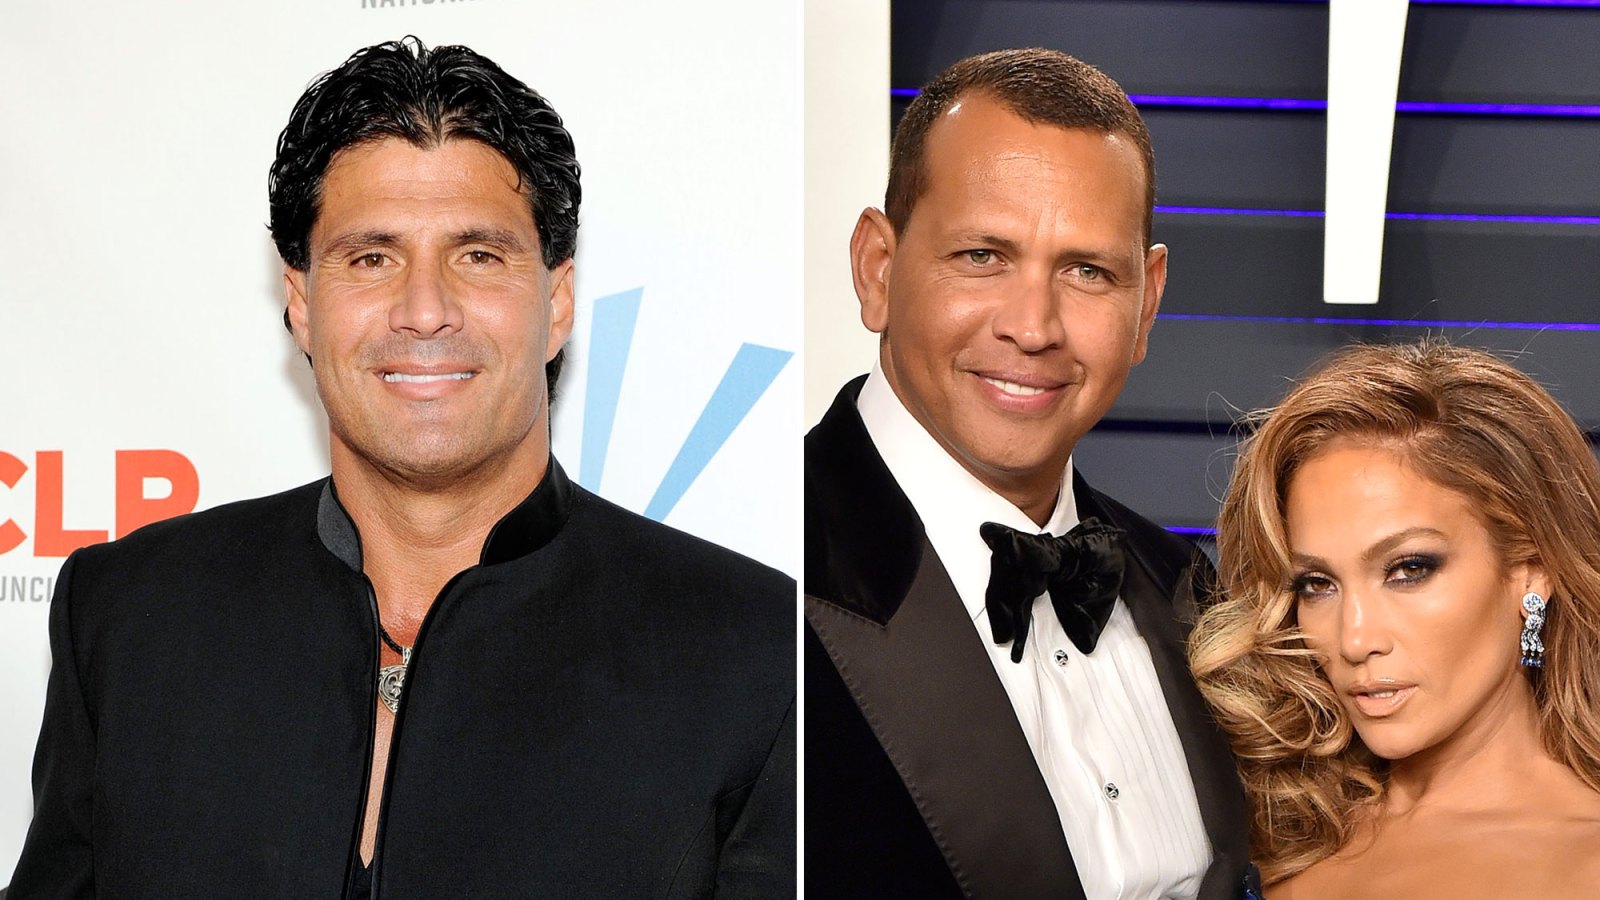 Jose Canseco Challenges A-Rod to a Polygraph Test After Claiming He Cheats on J. Lo